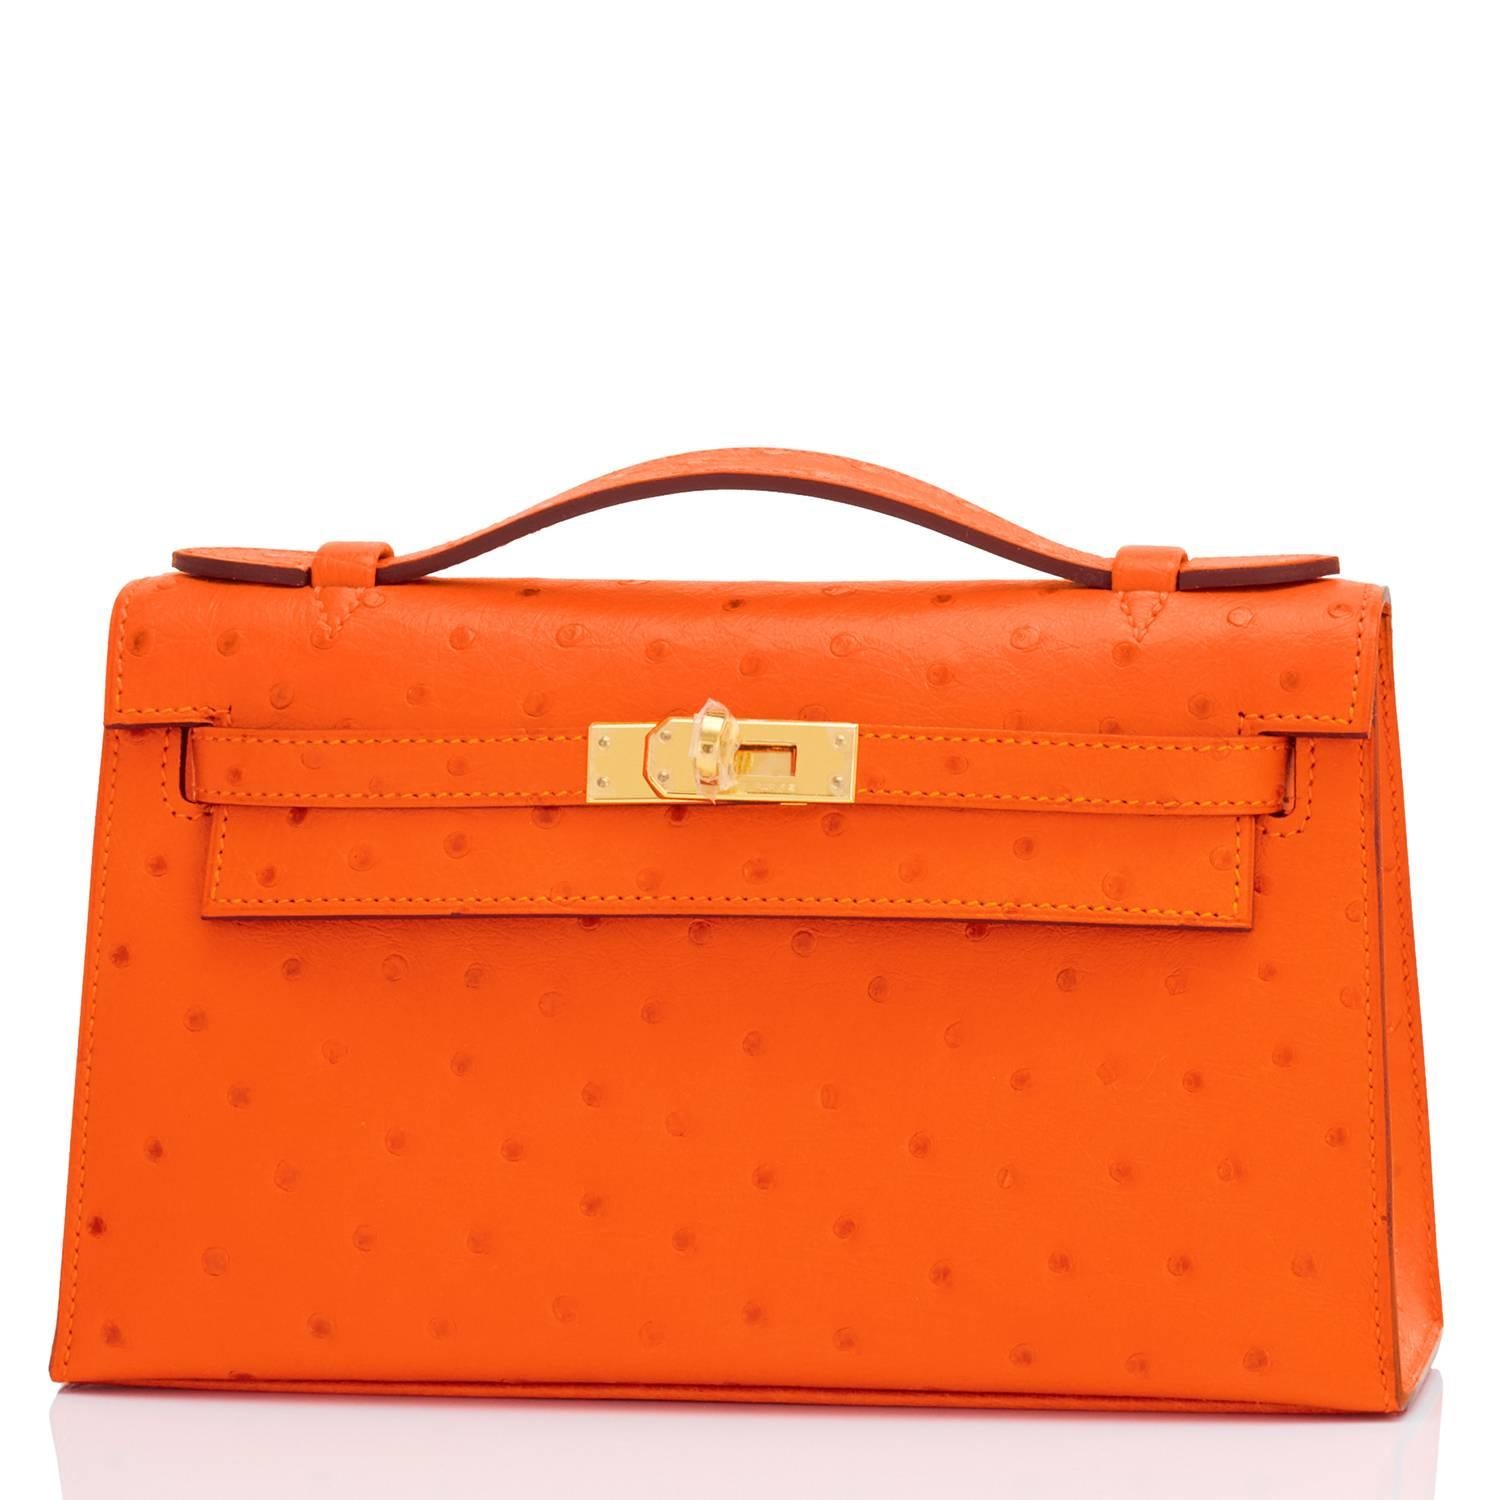 Hermes Tangerine Ostrich Mini Orange Kelly Pochette Gold Hardware
Brand New in Box. Store Fresh. Pristine Condition (with plastic on hardware).
Perfect gift! Comes with Hermes felt cover, orange box, sleeper, and ribbon.
Very rare and mesmerizing